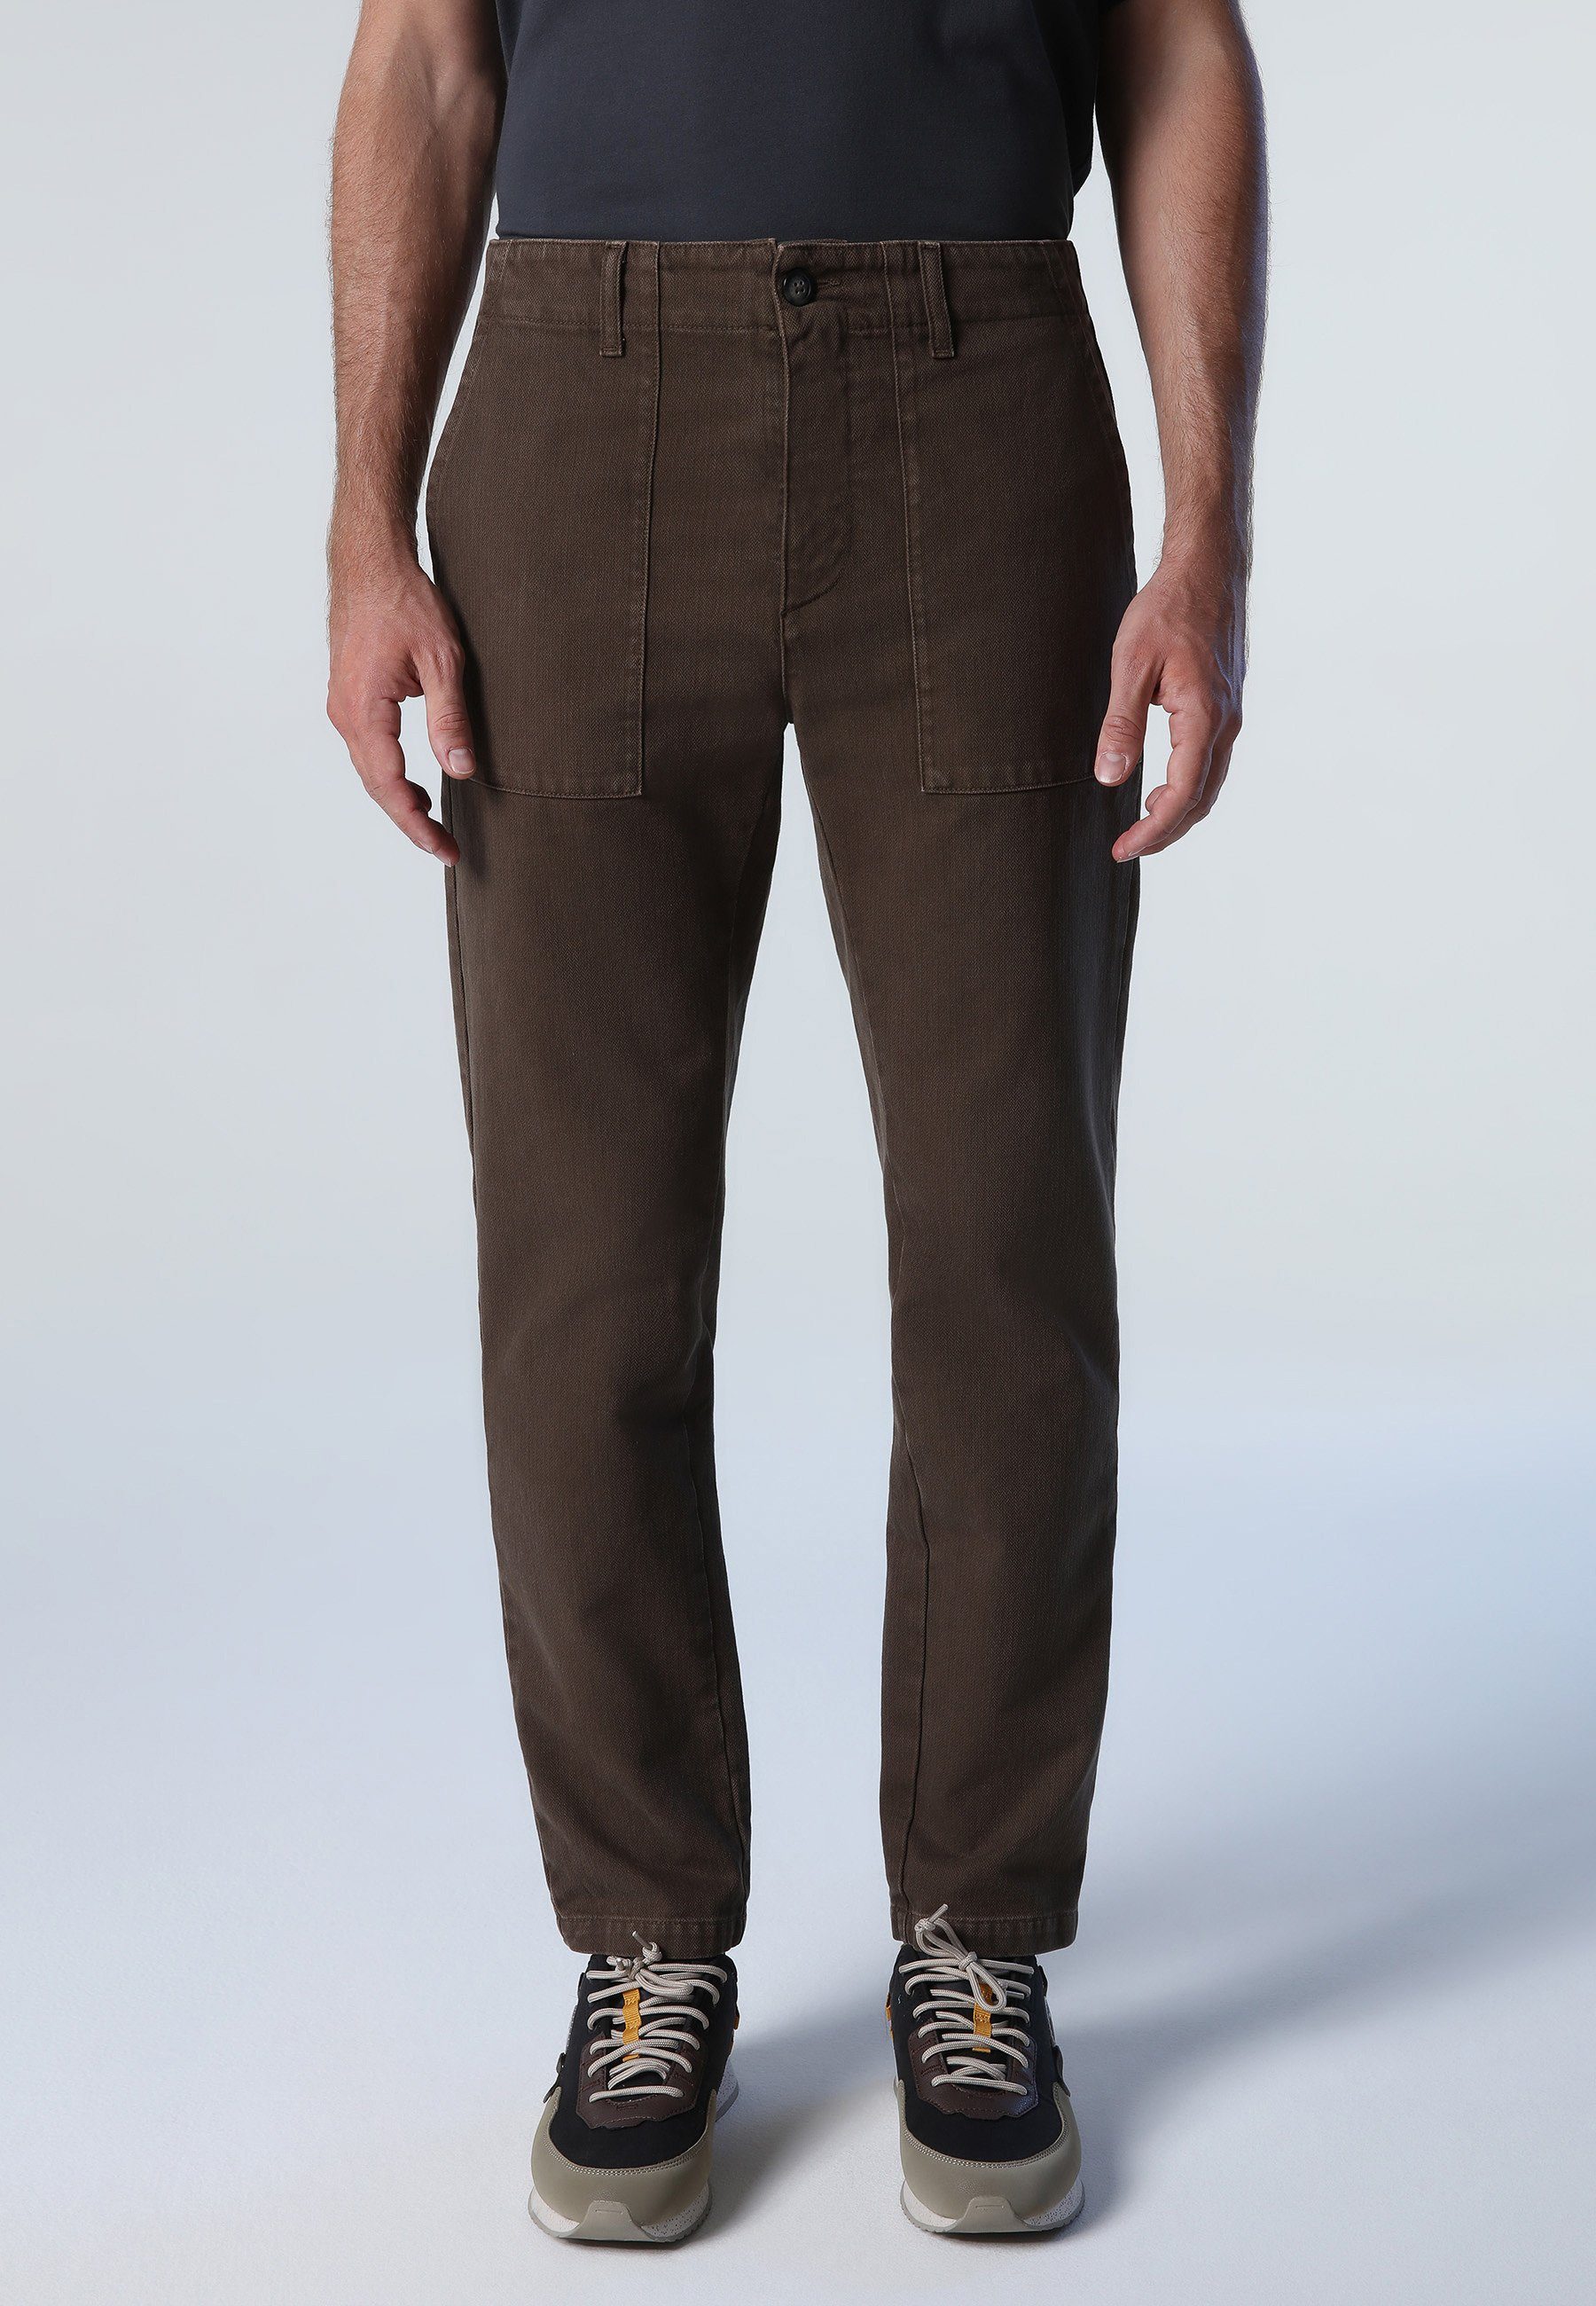 North Sails Cargohose Cargohose Recycled cotton COCOA trousers